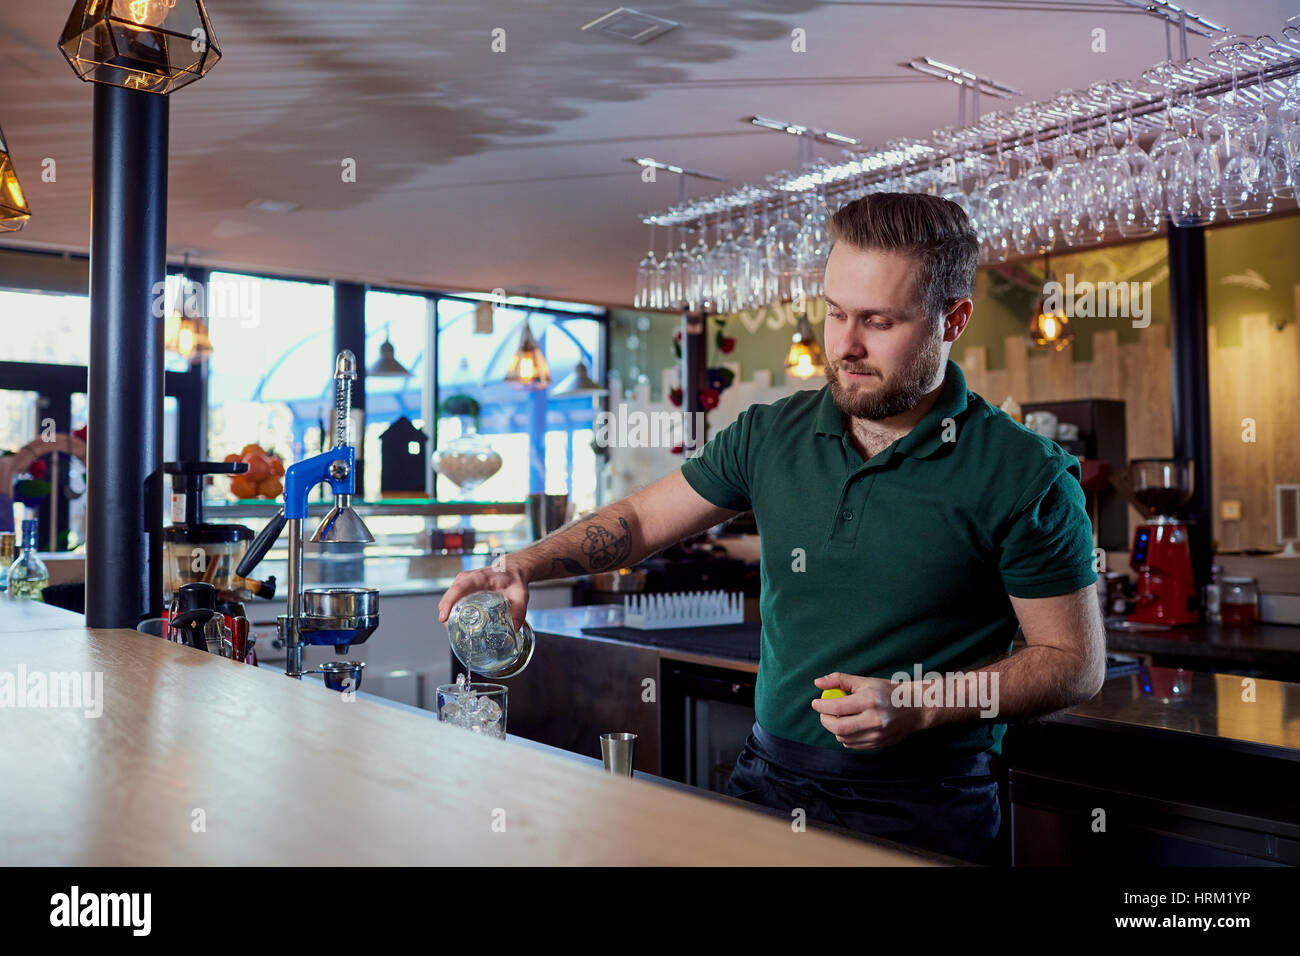 The bartender with beard behind bar pours a drink into  glass Stock Photo